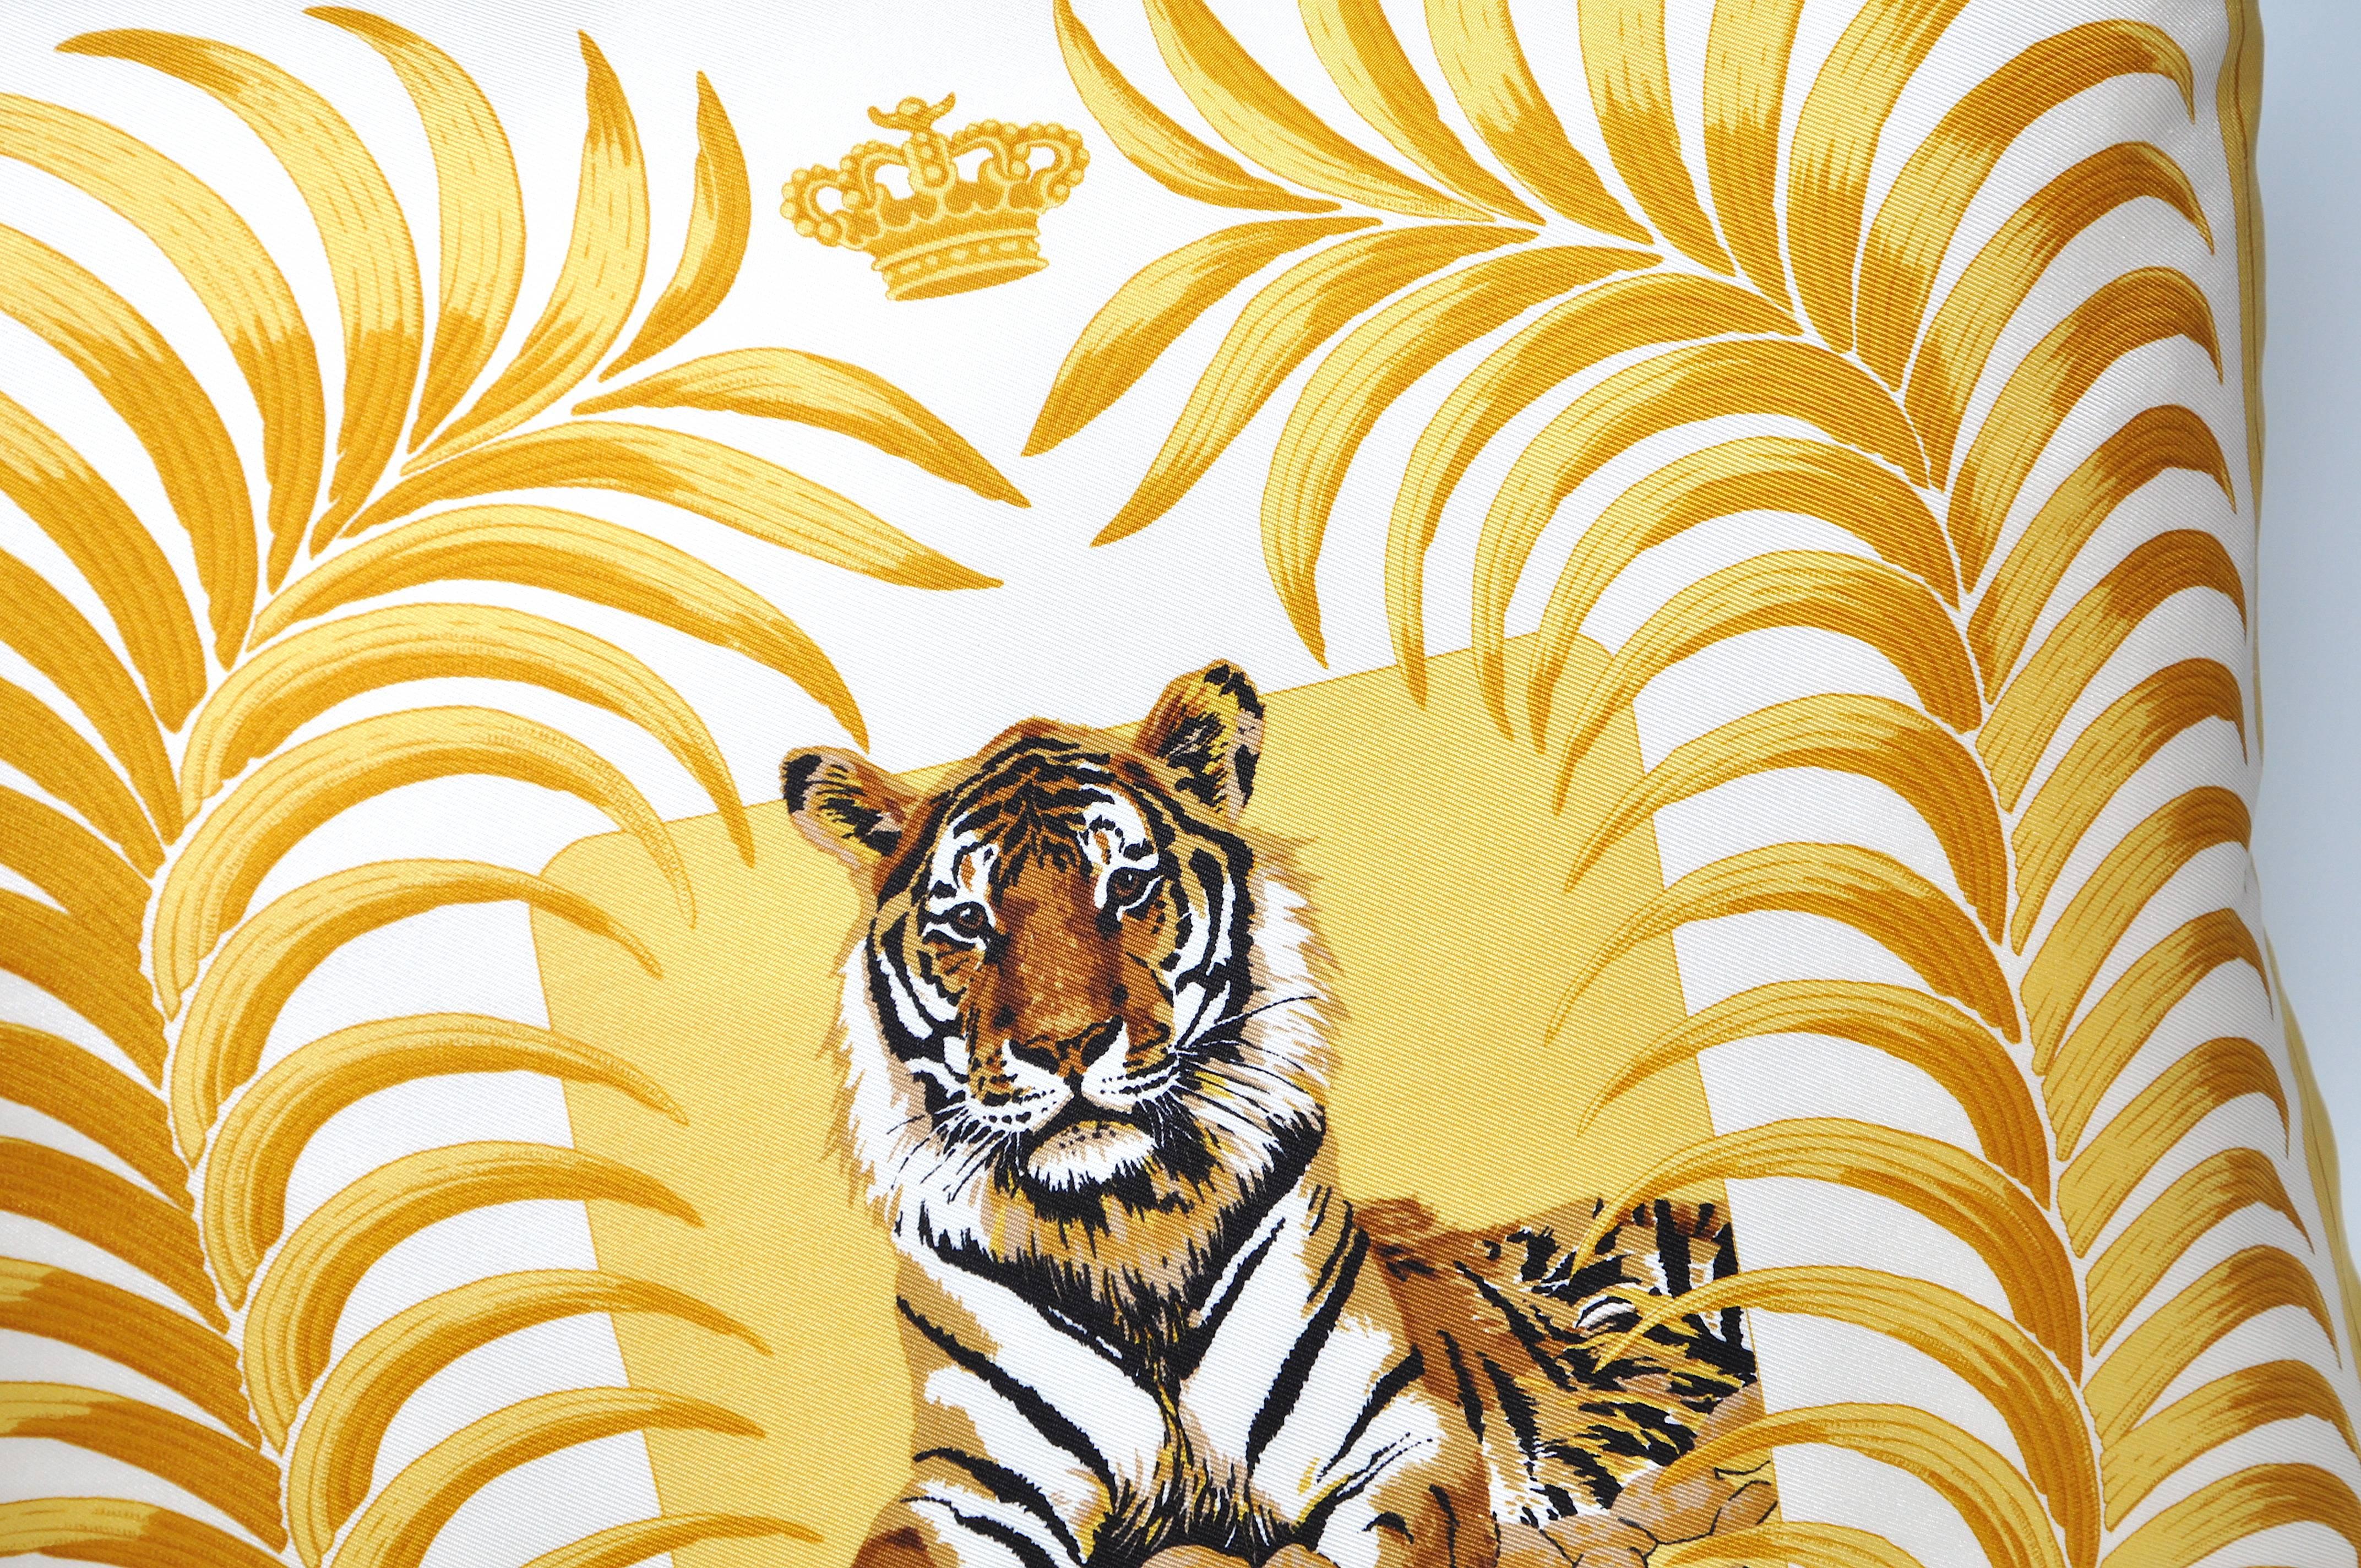 The ‘crème de la crème’ of scarves, this beauty is a one-of-a-kind custom-made luxury cushion (pillow) from an exquisite vintage silk Hermes fashion scarf featuring a seated tiger amongst a luscious wreath.

The French company began in 1837